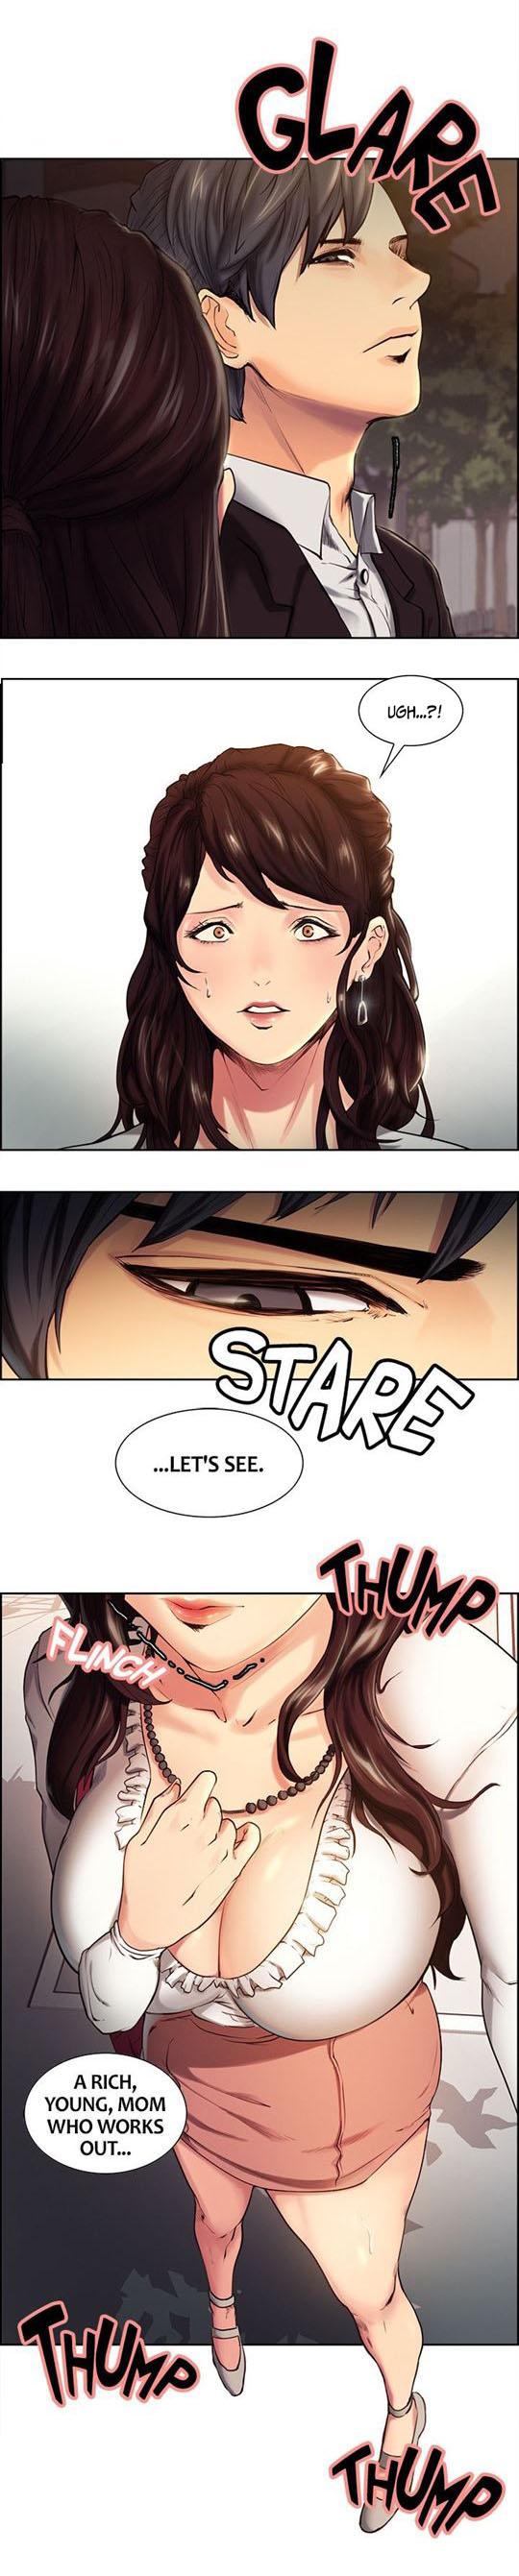 Foursome Taste of Forbbiden Fruit Ch.28/53 Teenage Sex - Page 6